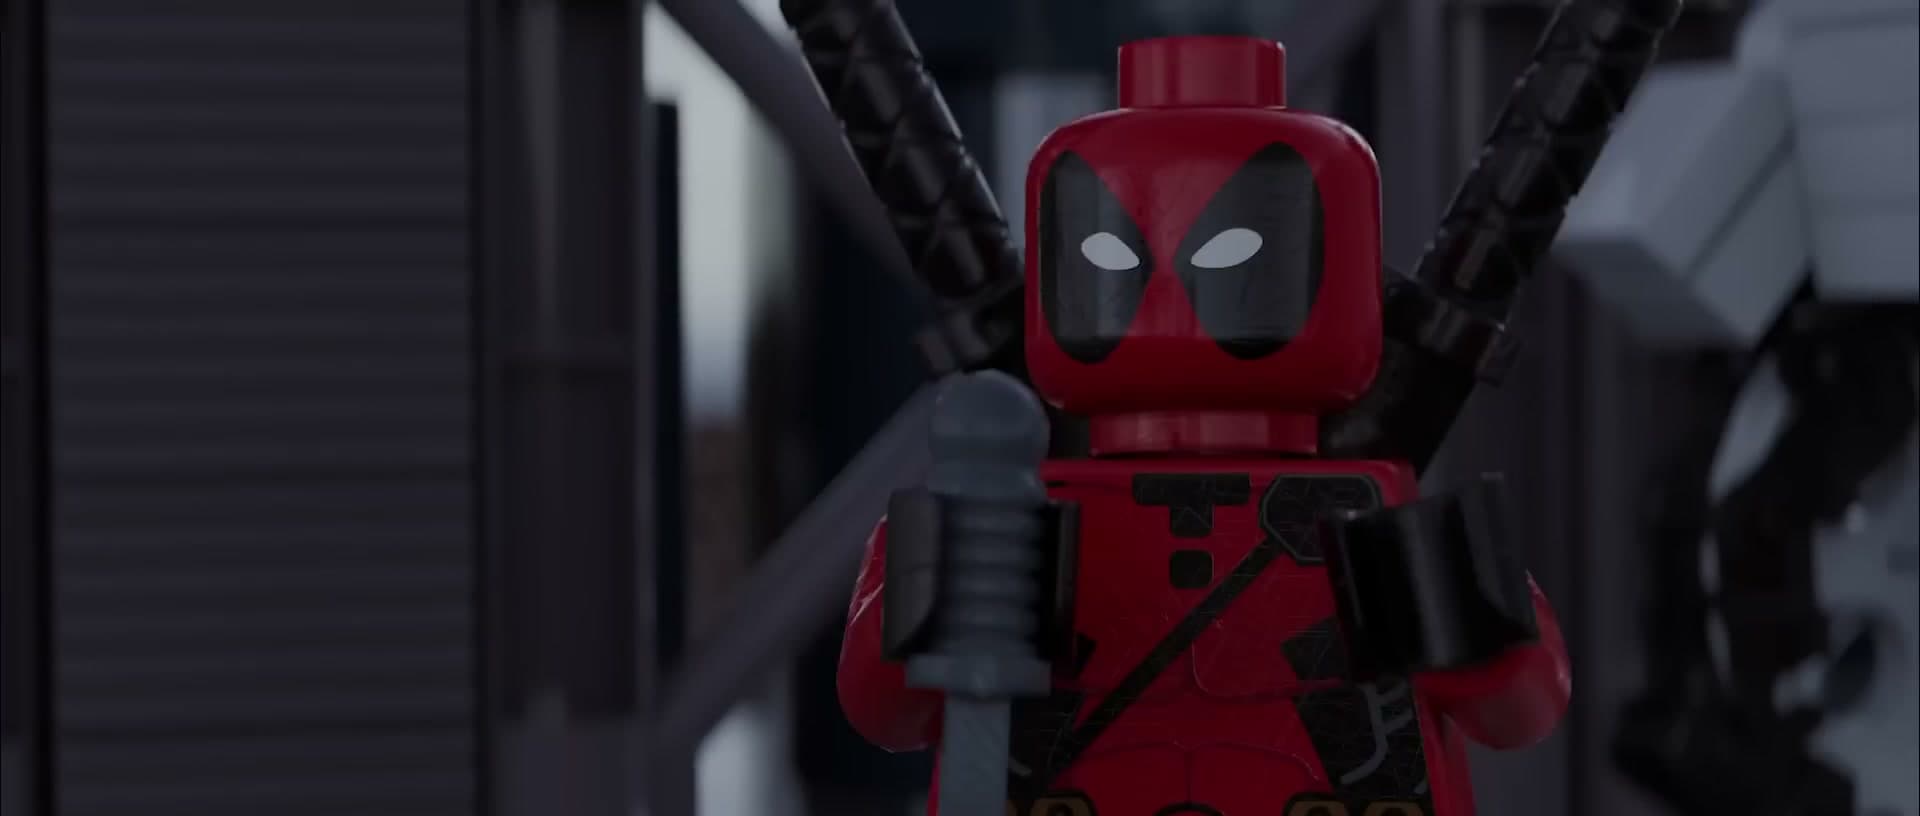 Lego Deadpool in a Lego version of the Deadpool and Wolverine trailer.